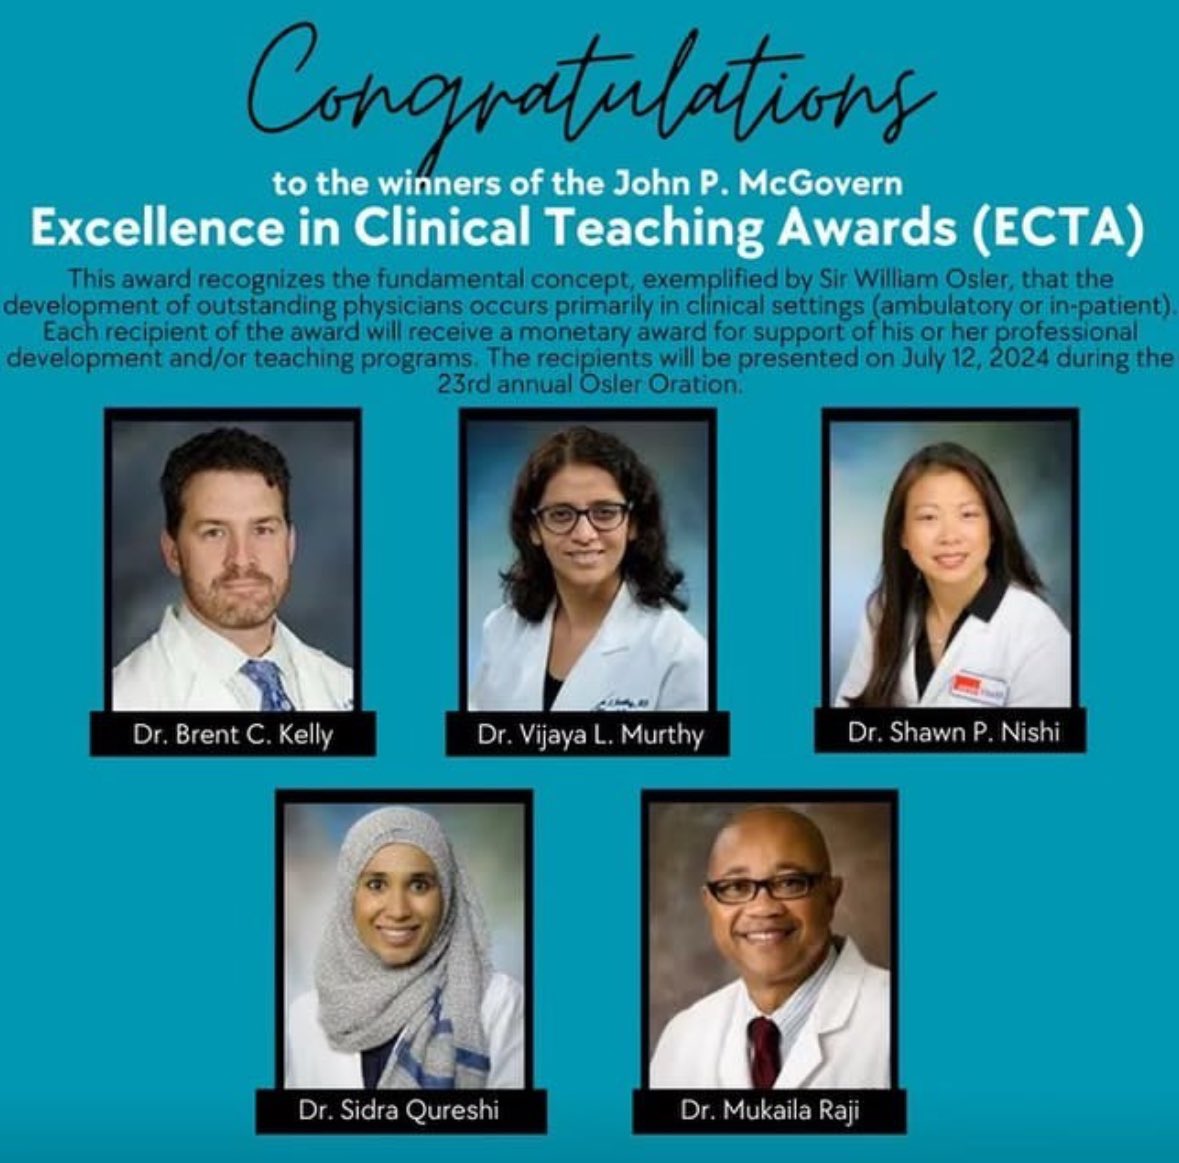 Congratulations to these amazing faculty members (including our program director Dr. Nishi) on being recognized for their excellence in clinical teaching! We are so fortunate to work with mentors like them here at UTMB